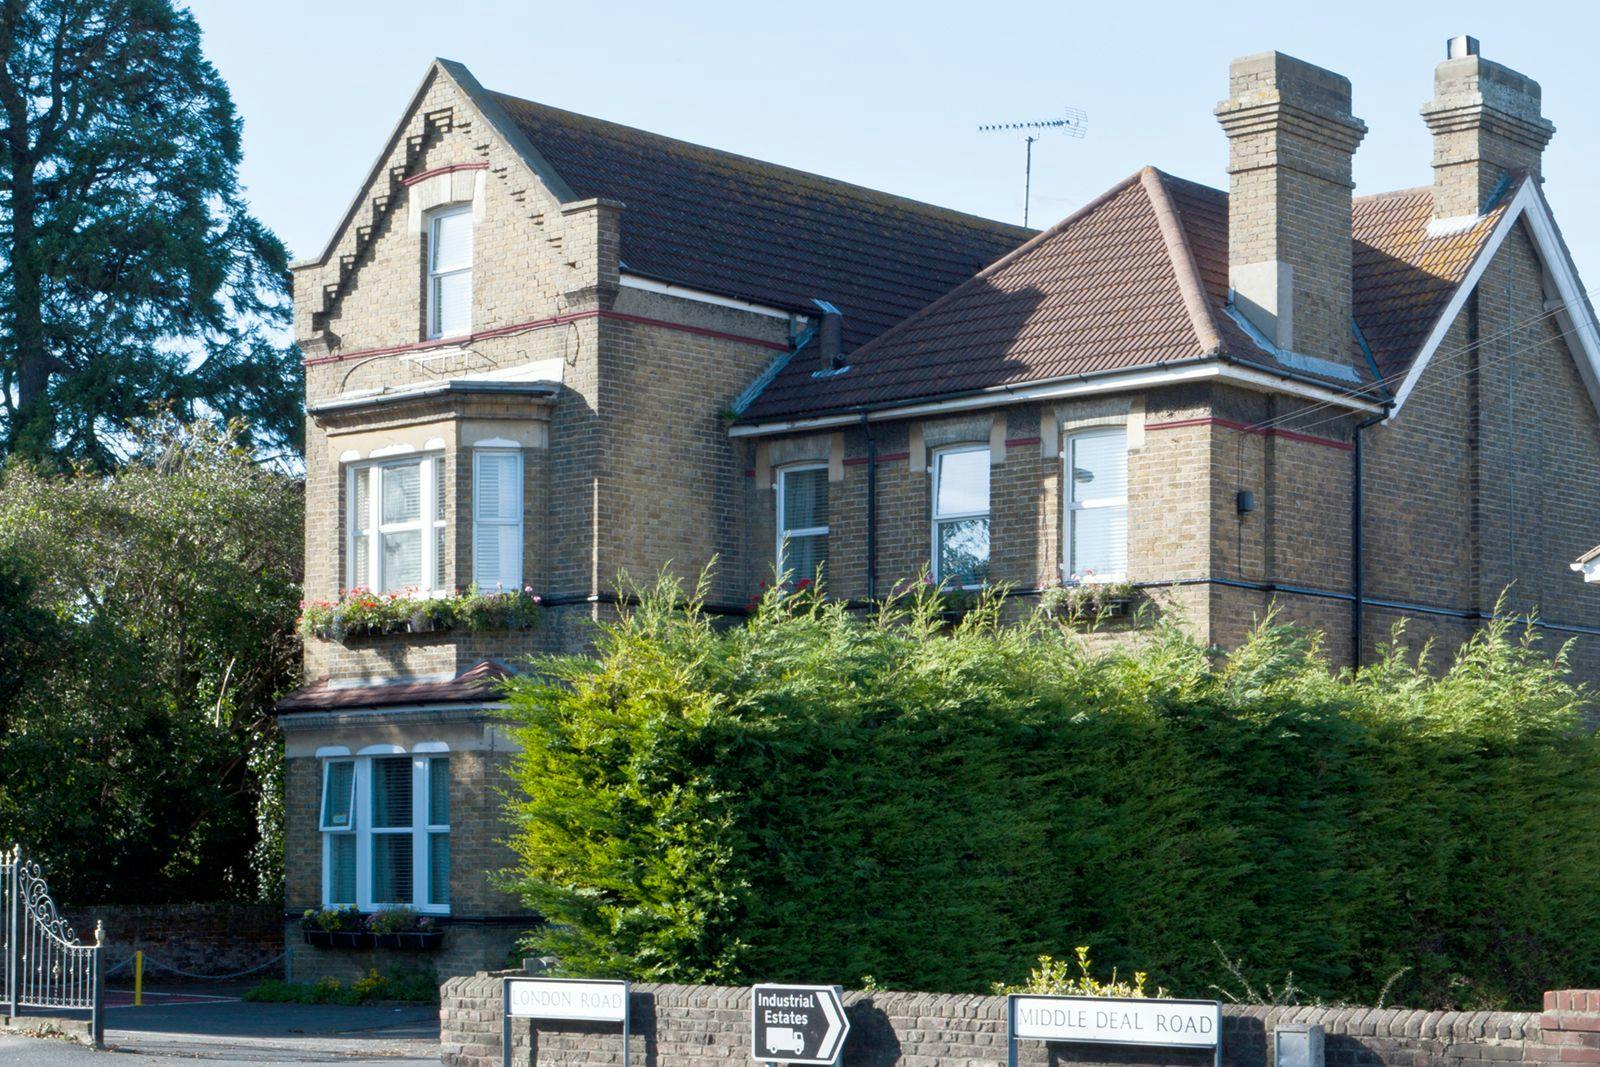 St Winifred's care home